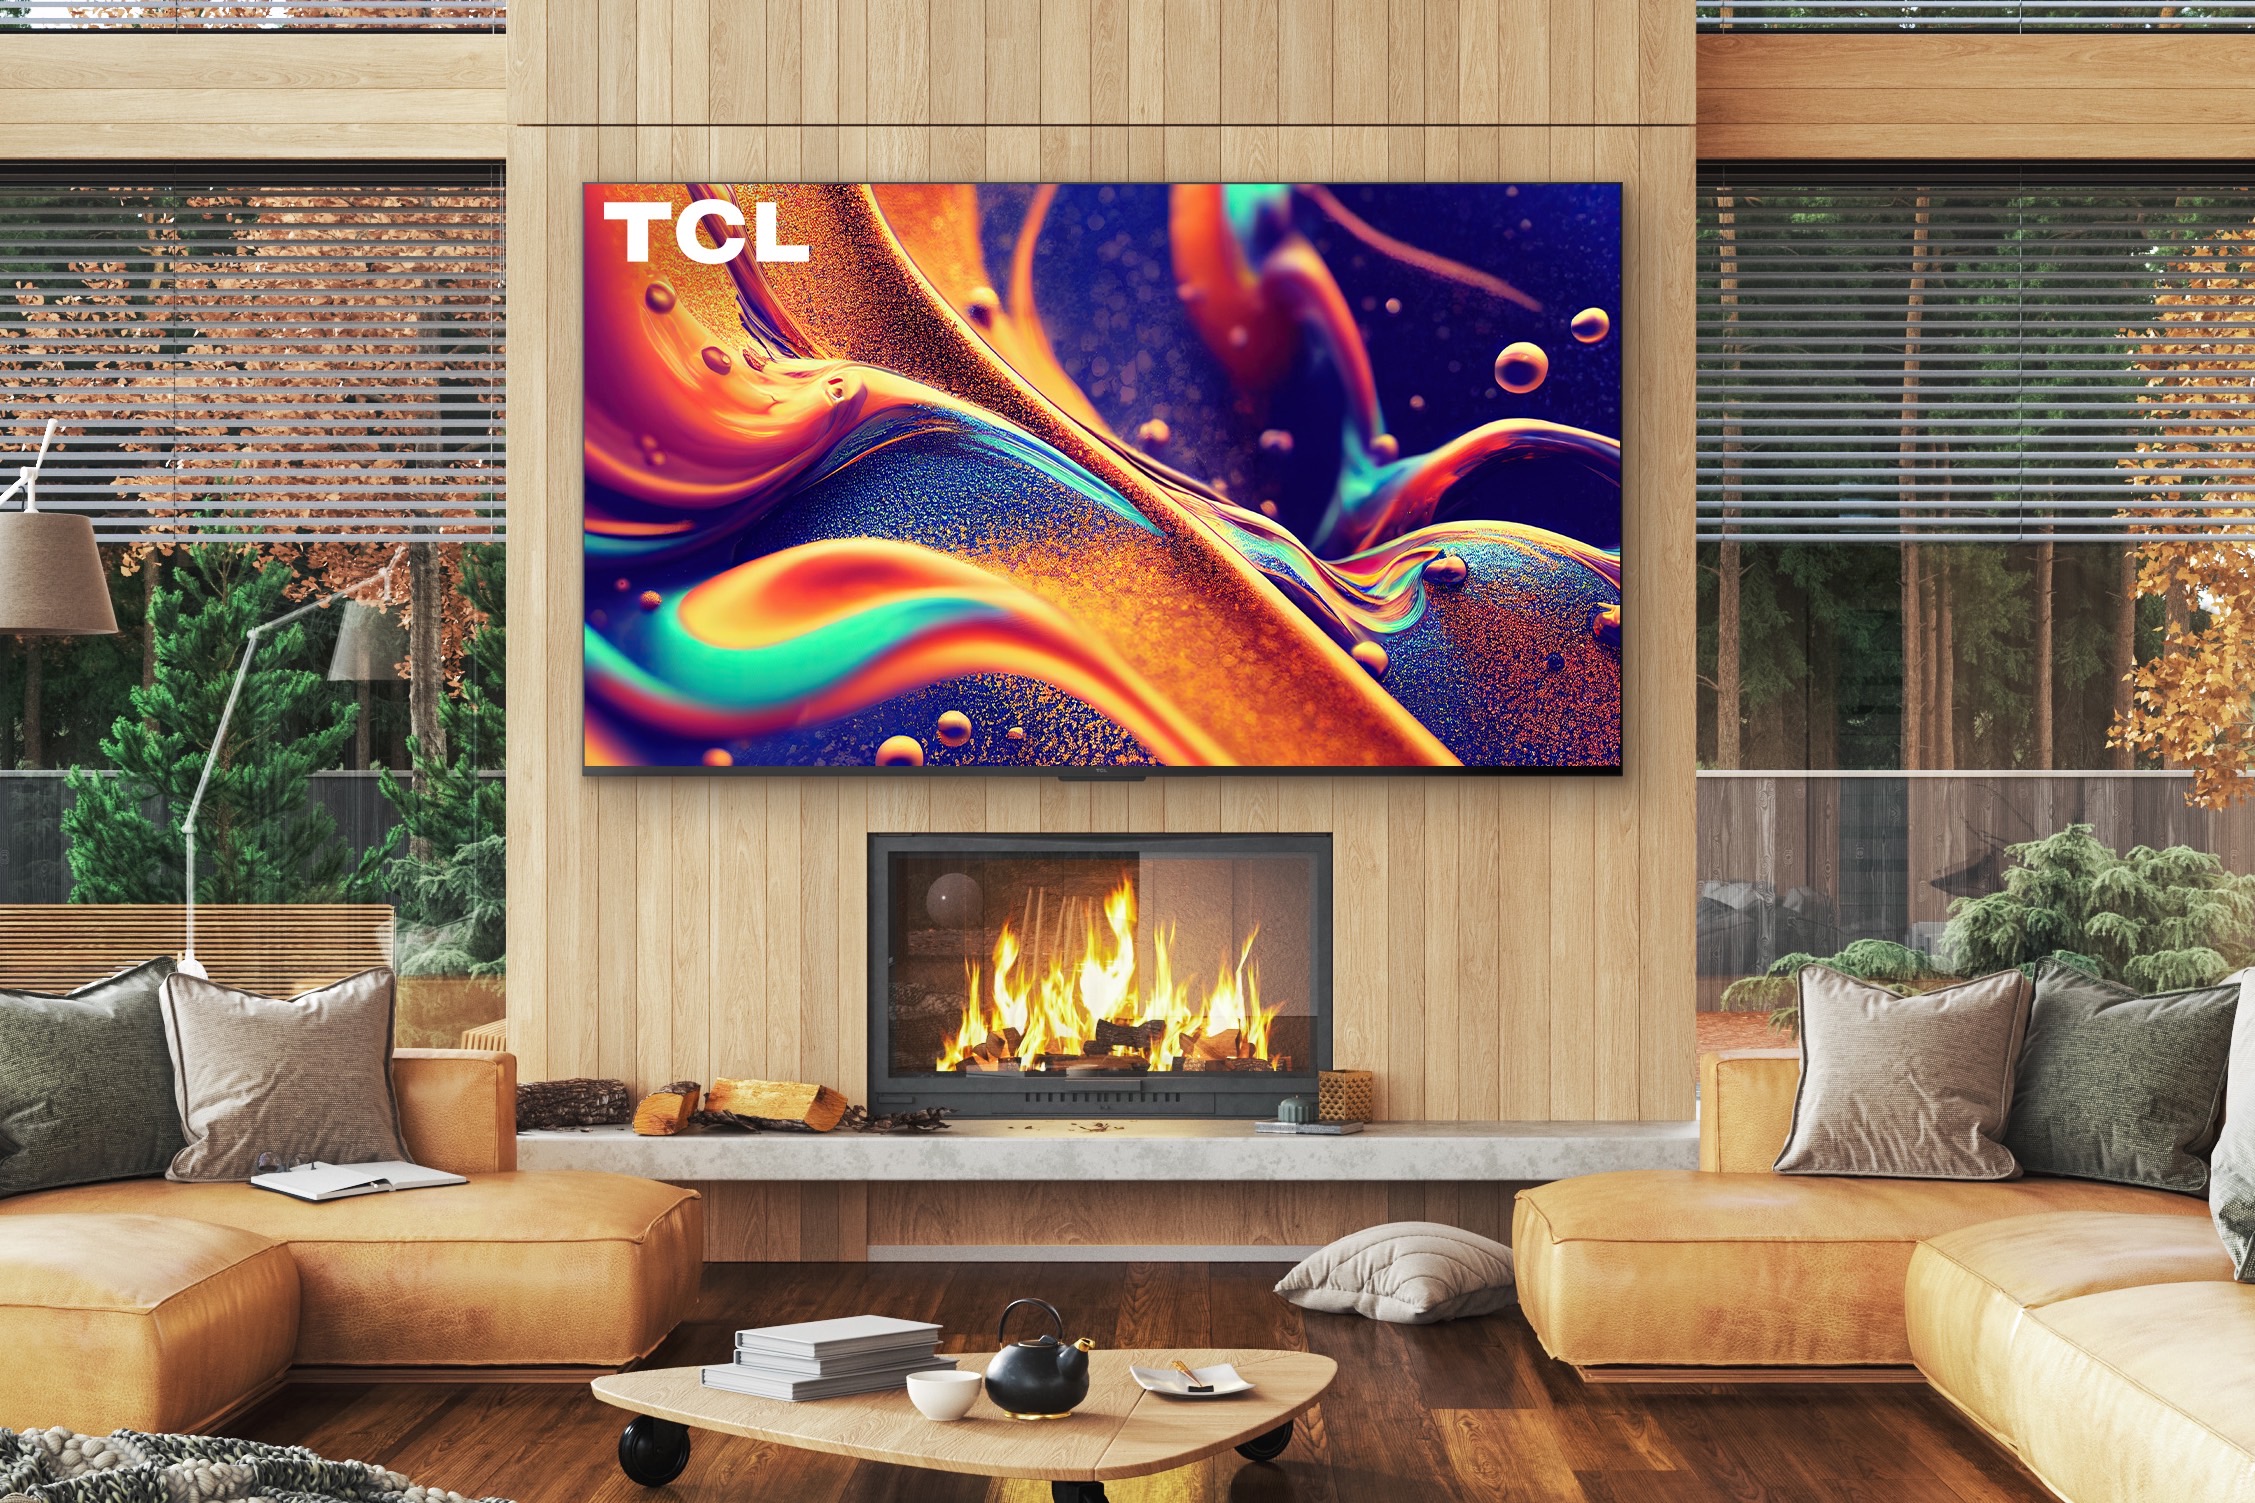 TCL 3-Series 2021 Roku TV Review: Entry-level elegance - Reviewed